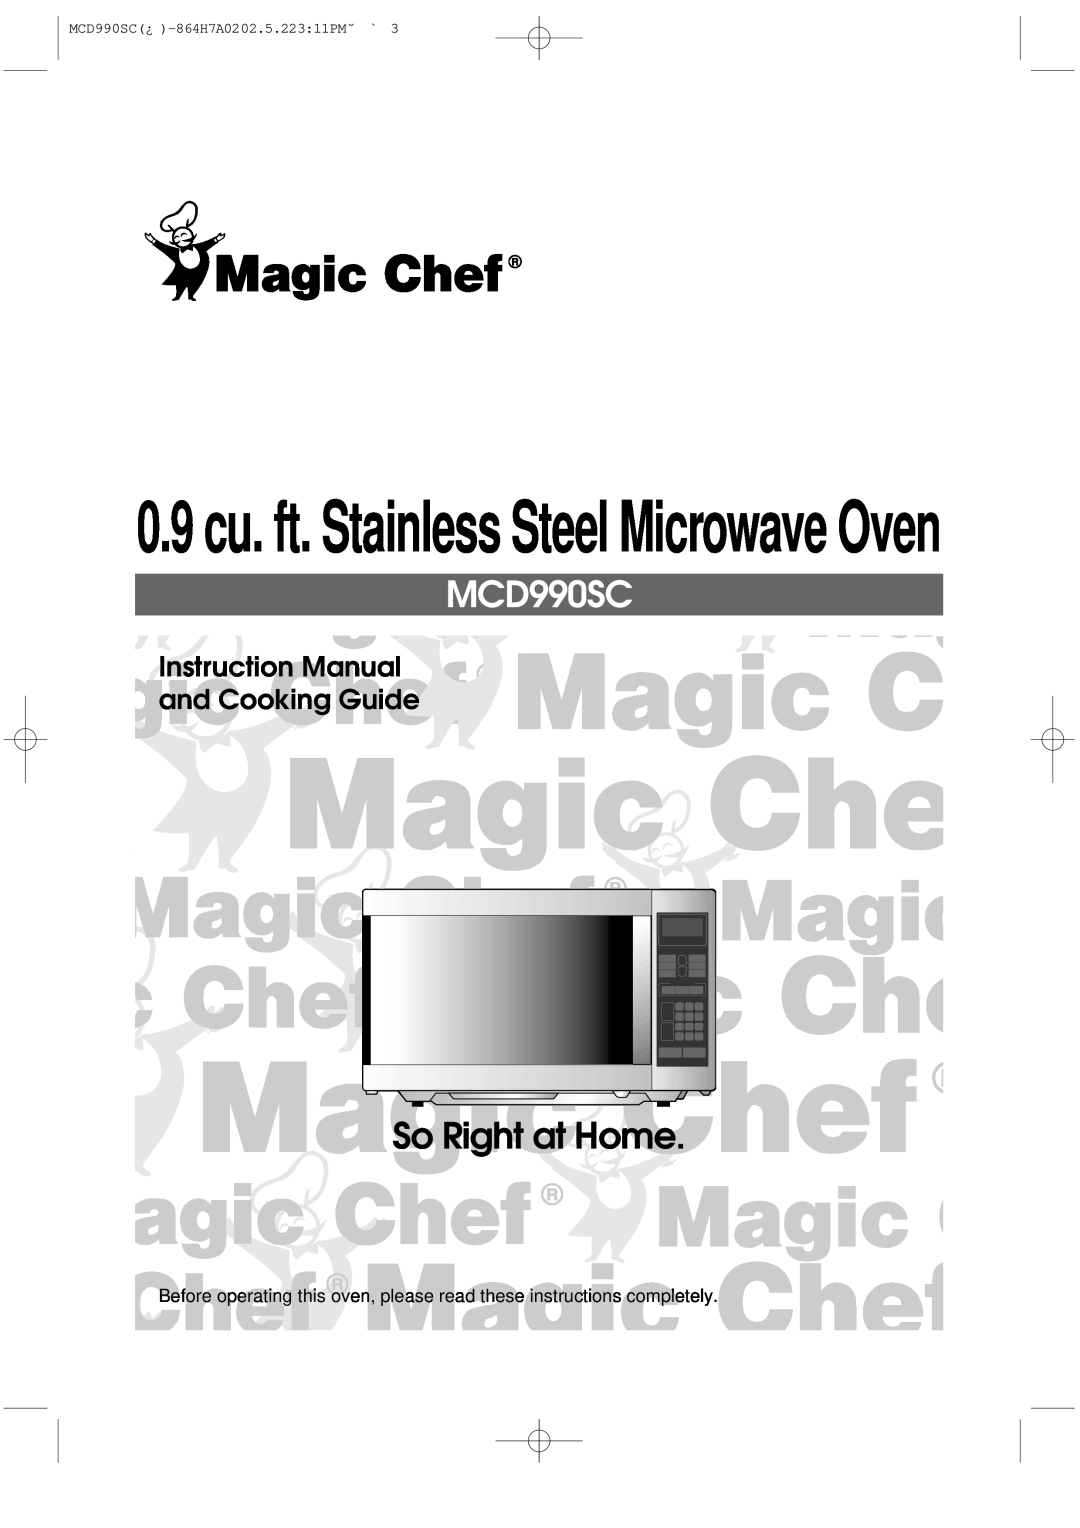 Magic Chef MCD990SC instruction manual 0.9 cu. ft. Stainless Steel Microwave Oven, So Right at Home 